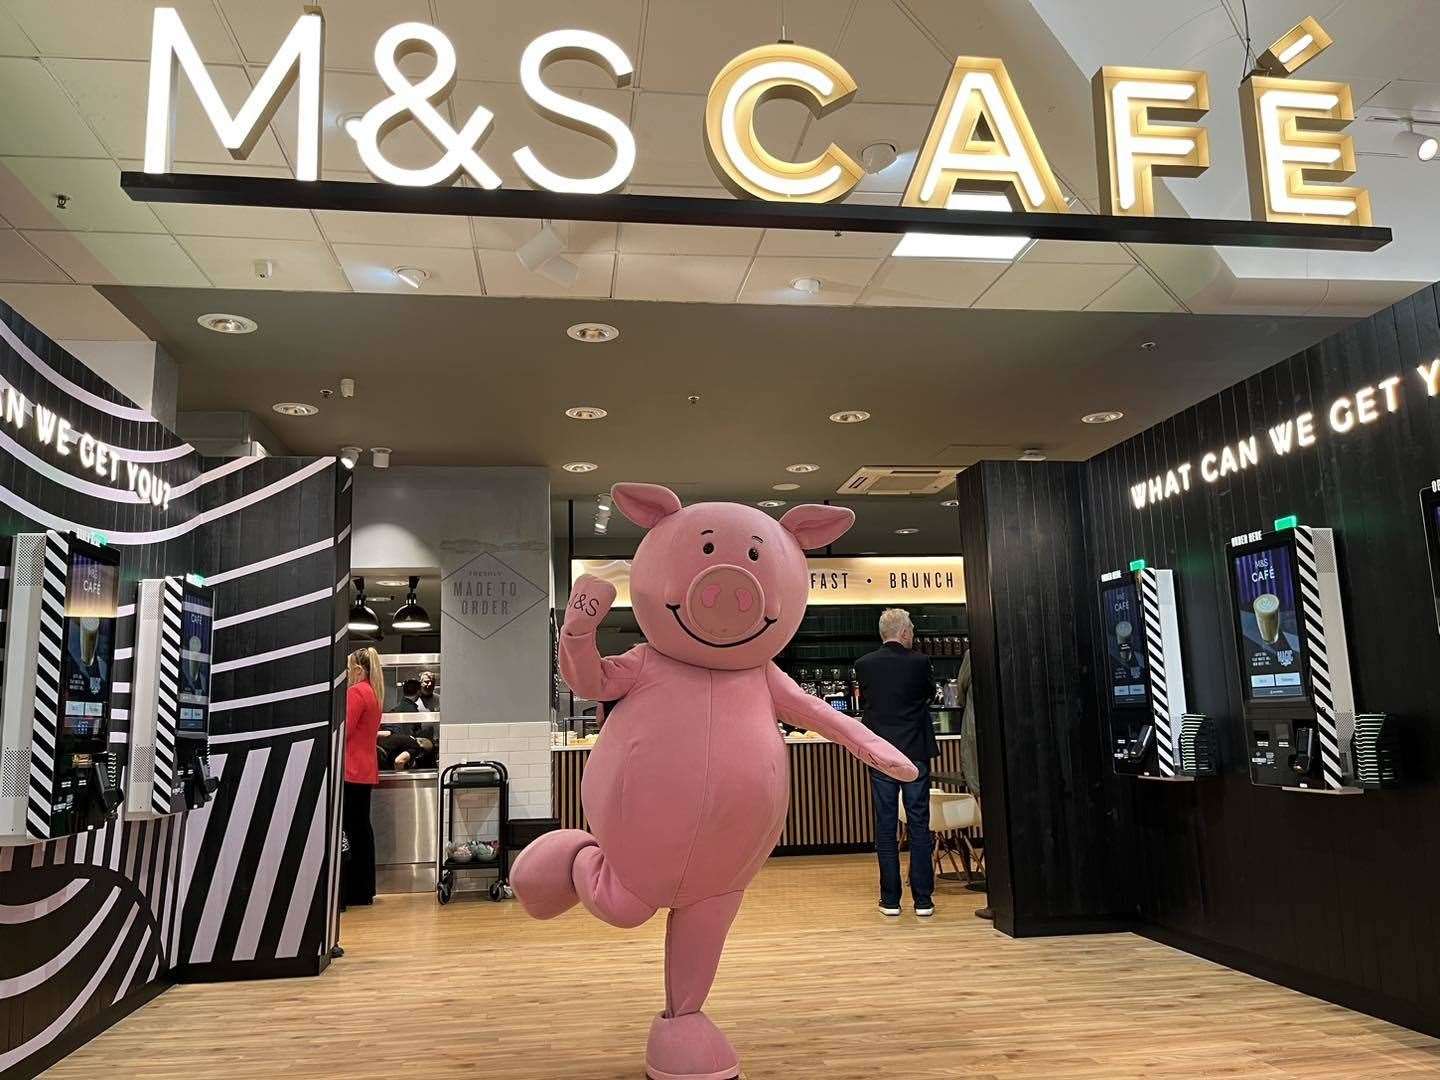 M&S café reopens at Hempstead Valley Shopping Centre in Gillingham